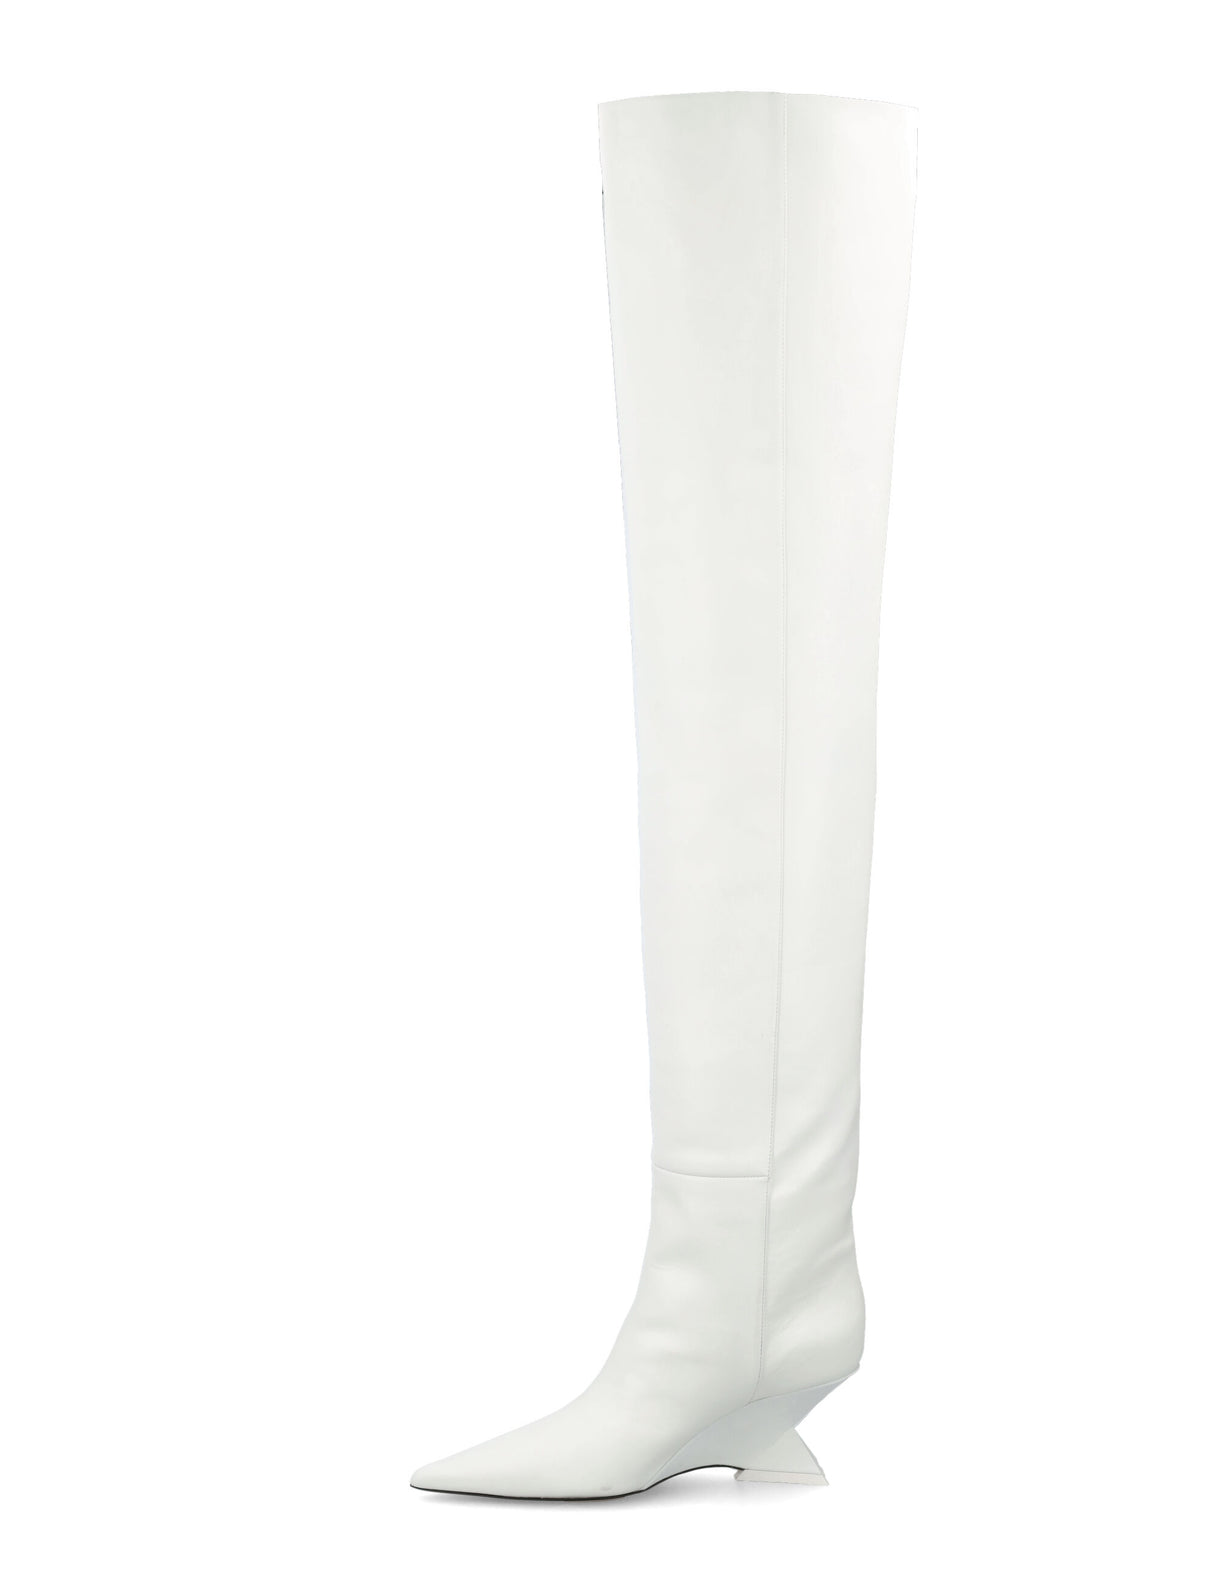 THE ATTICO White Leather Over-Knee Boots with Pyramid Wedge for Women